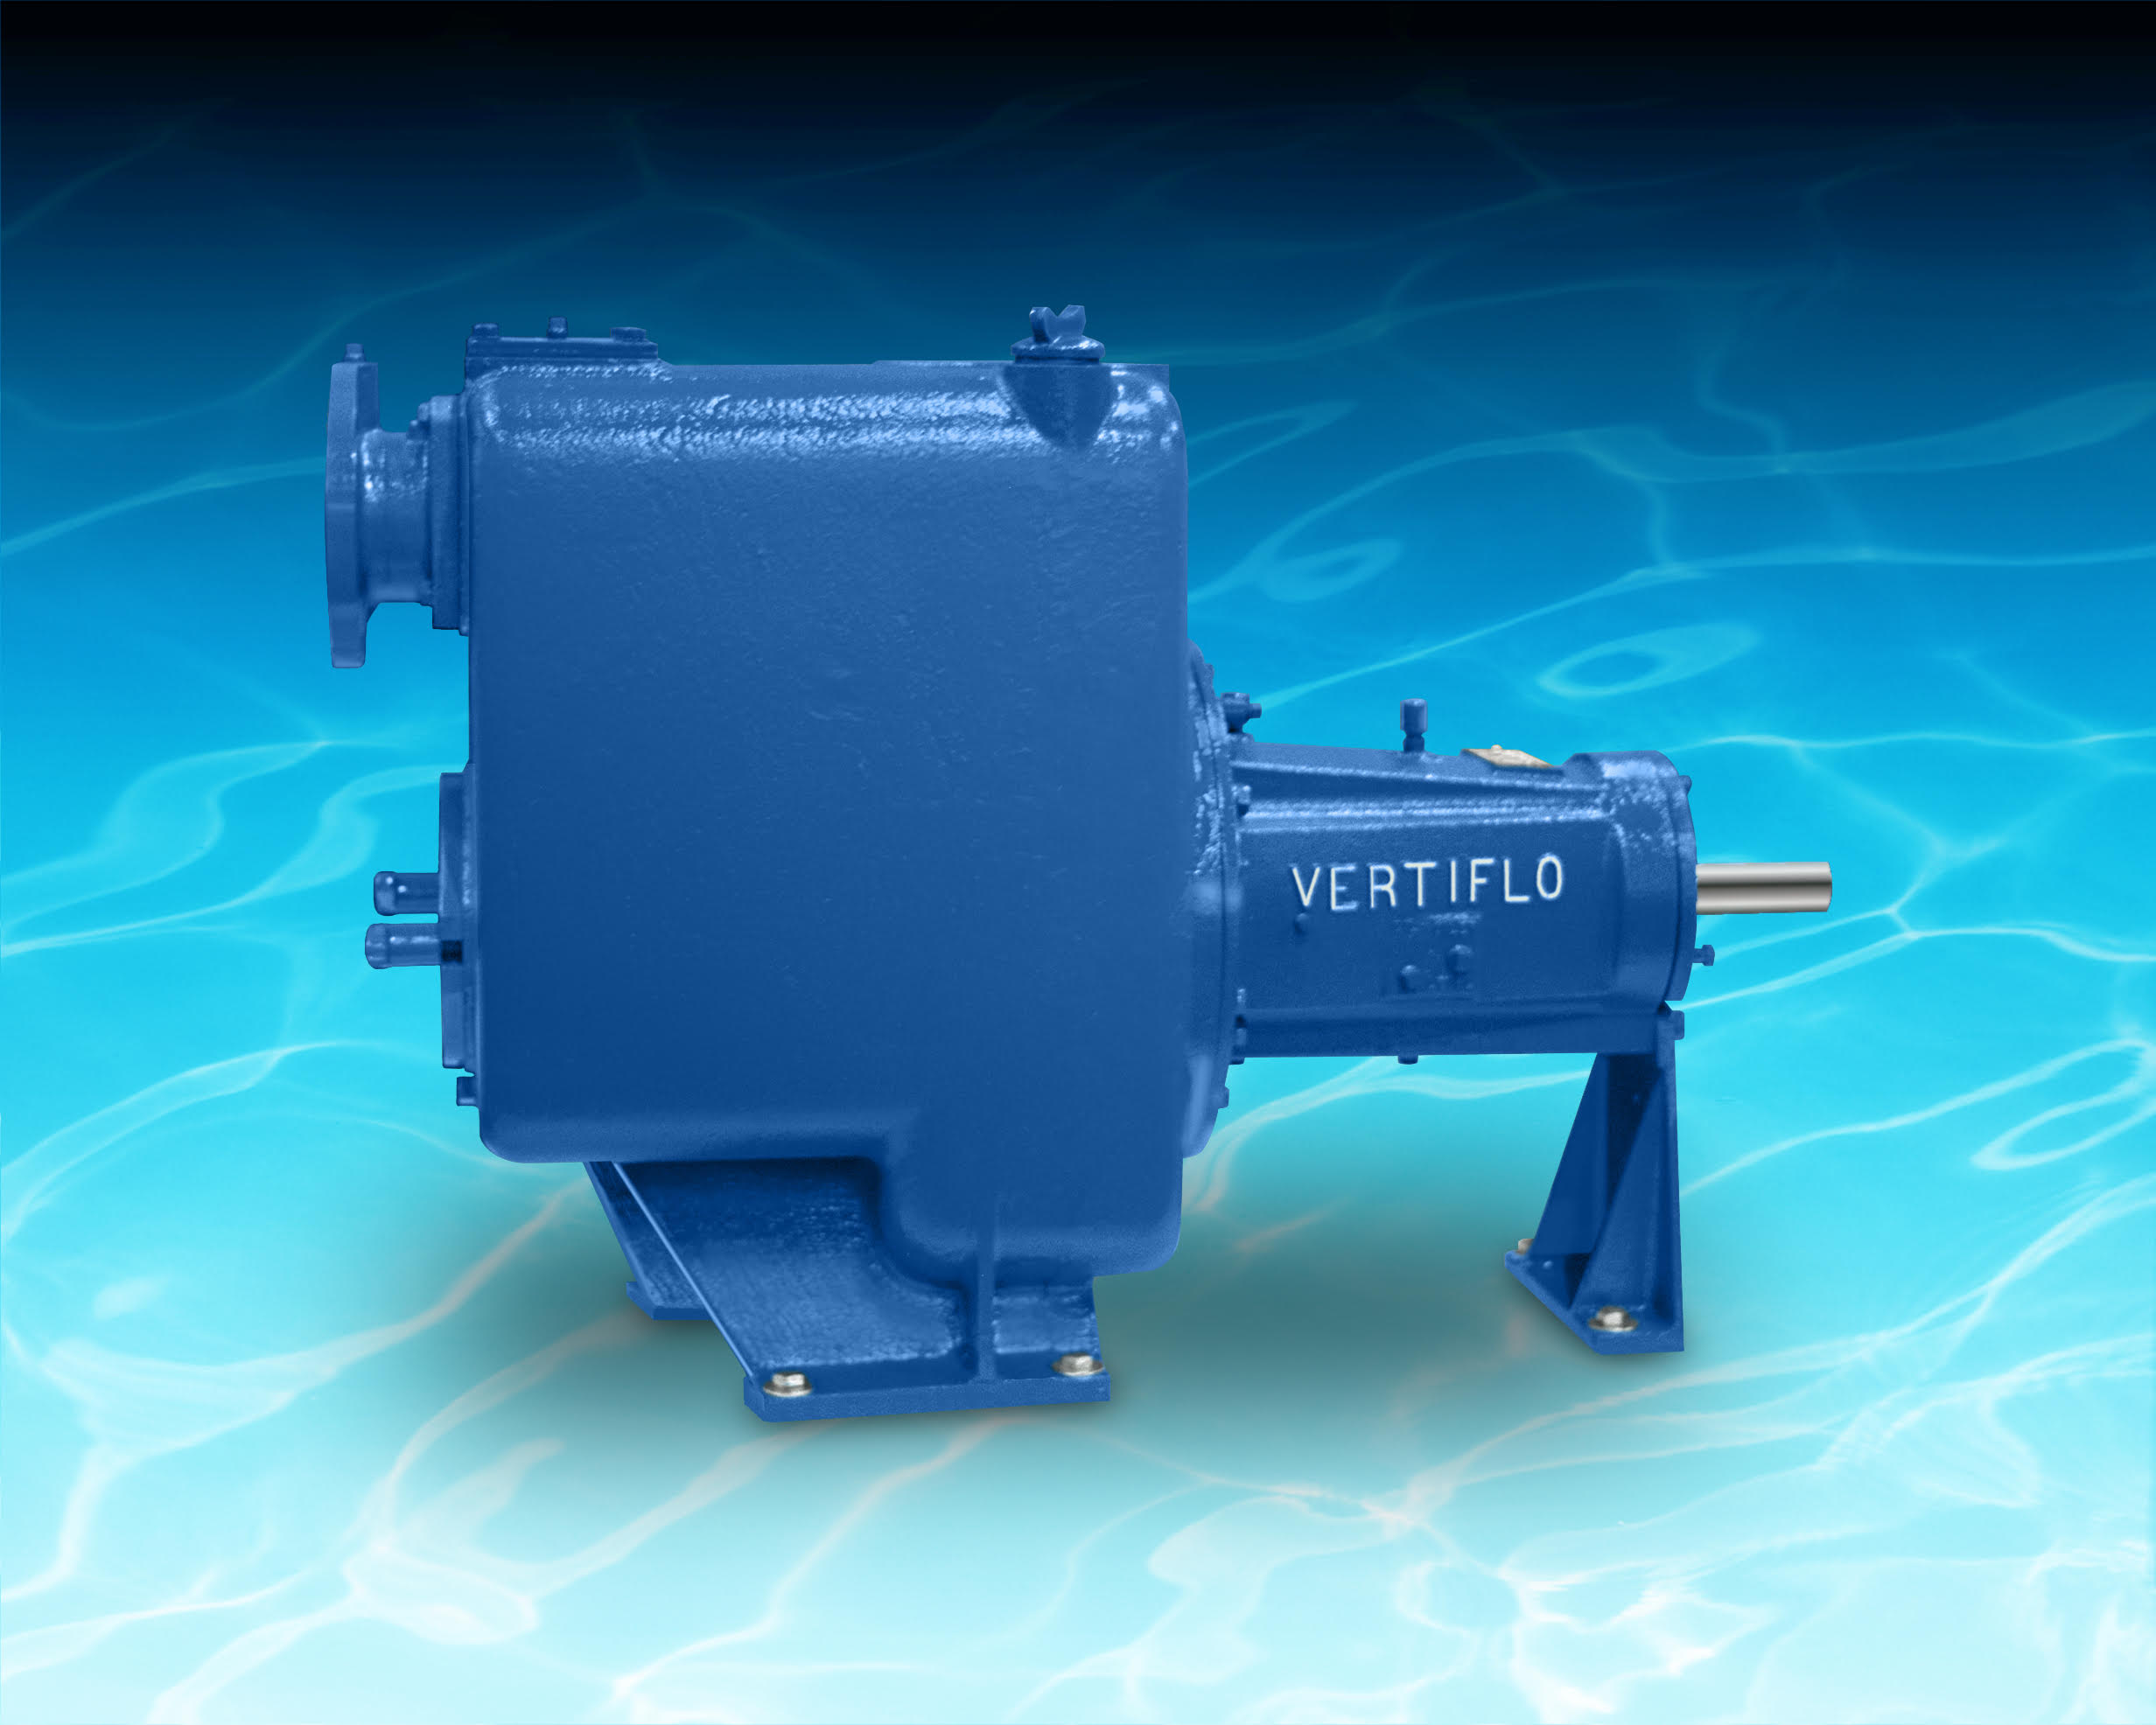 The Series 2100 is designed for applications including liquids entrained with solids, pulp and paper, mining, and wastewater.